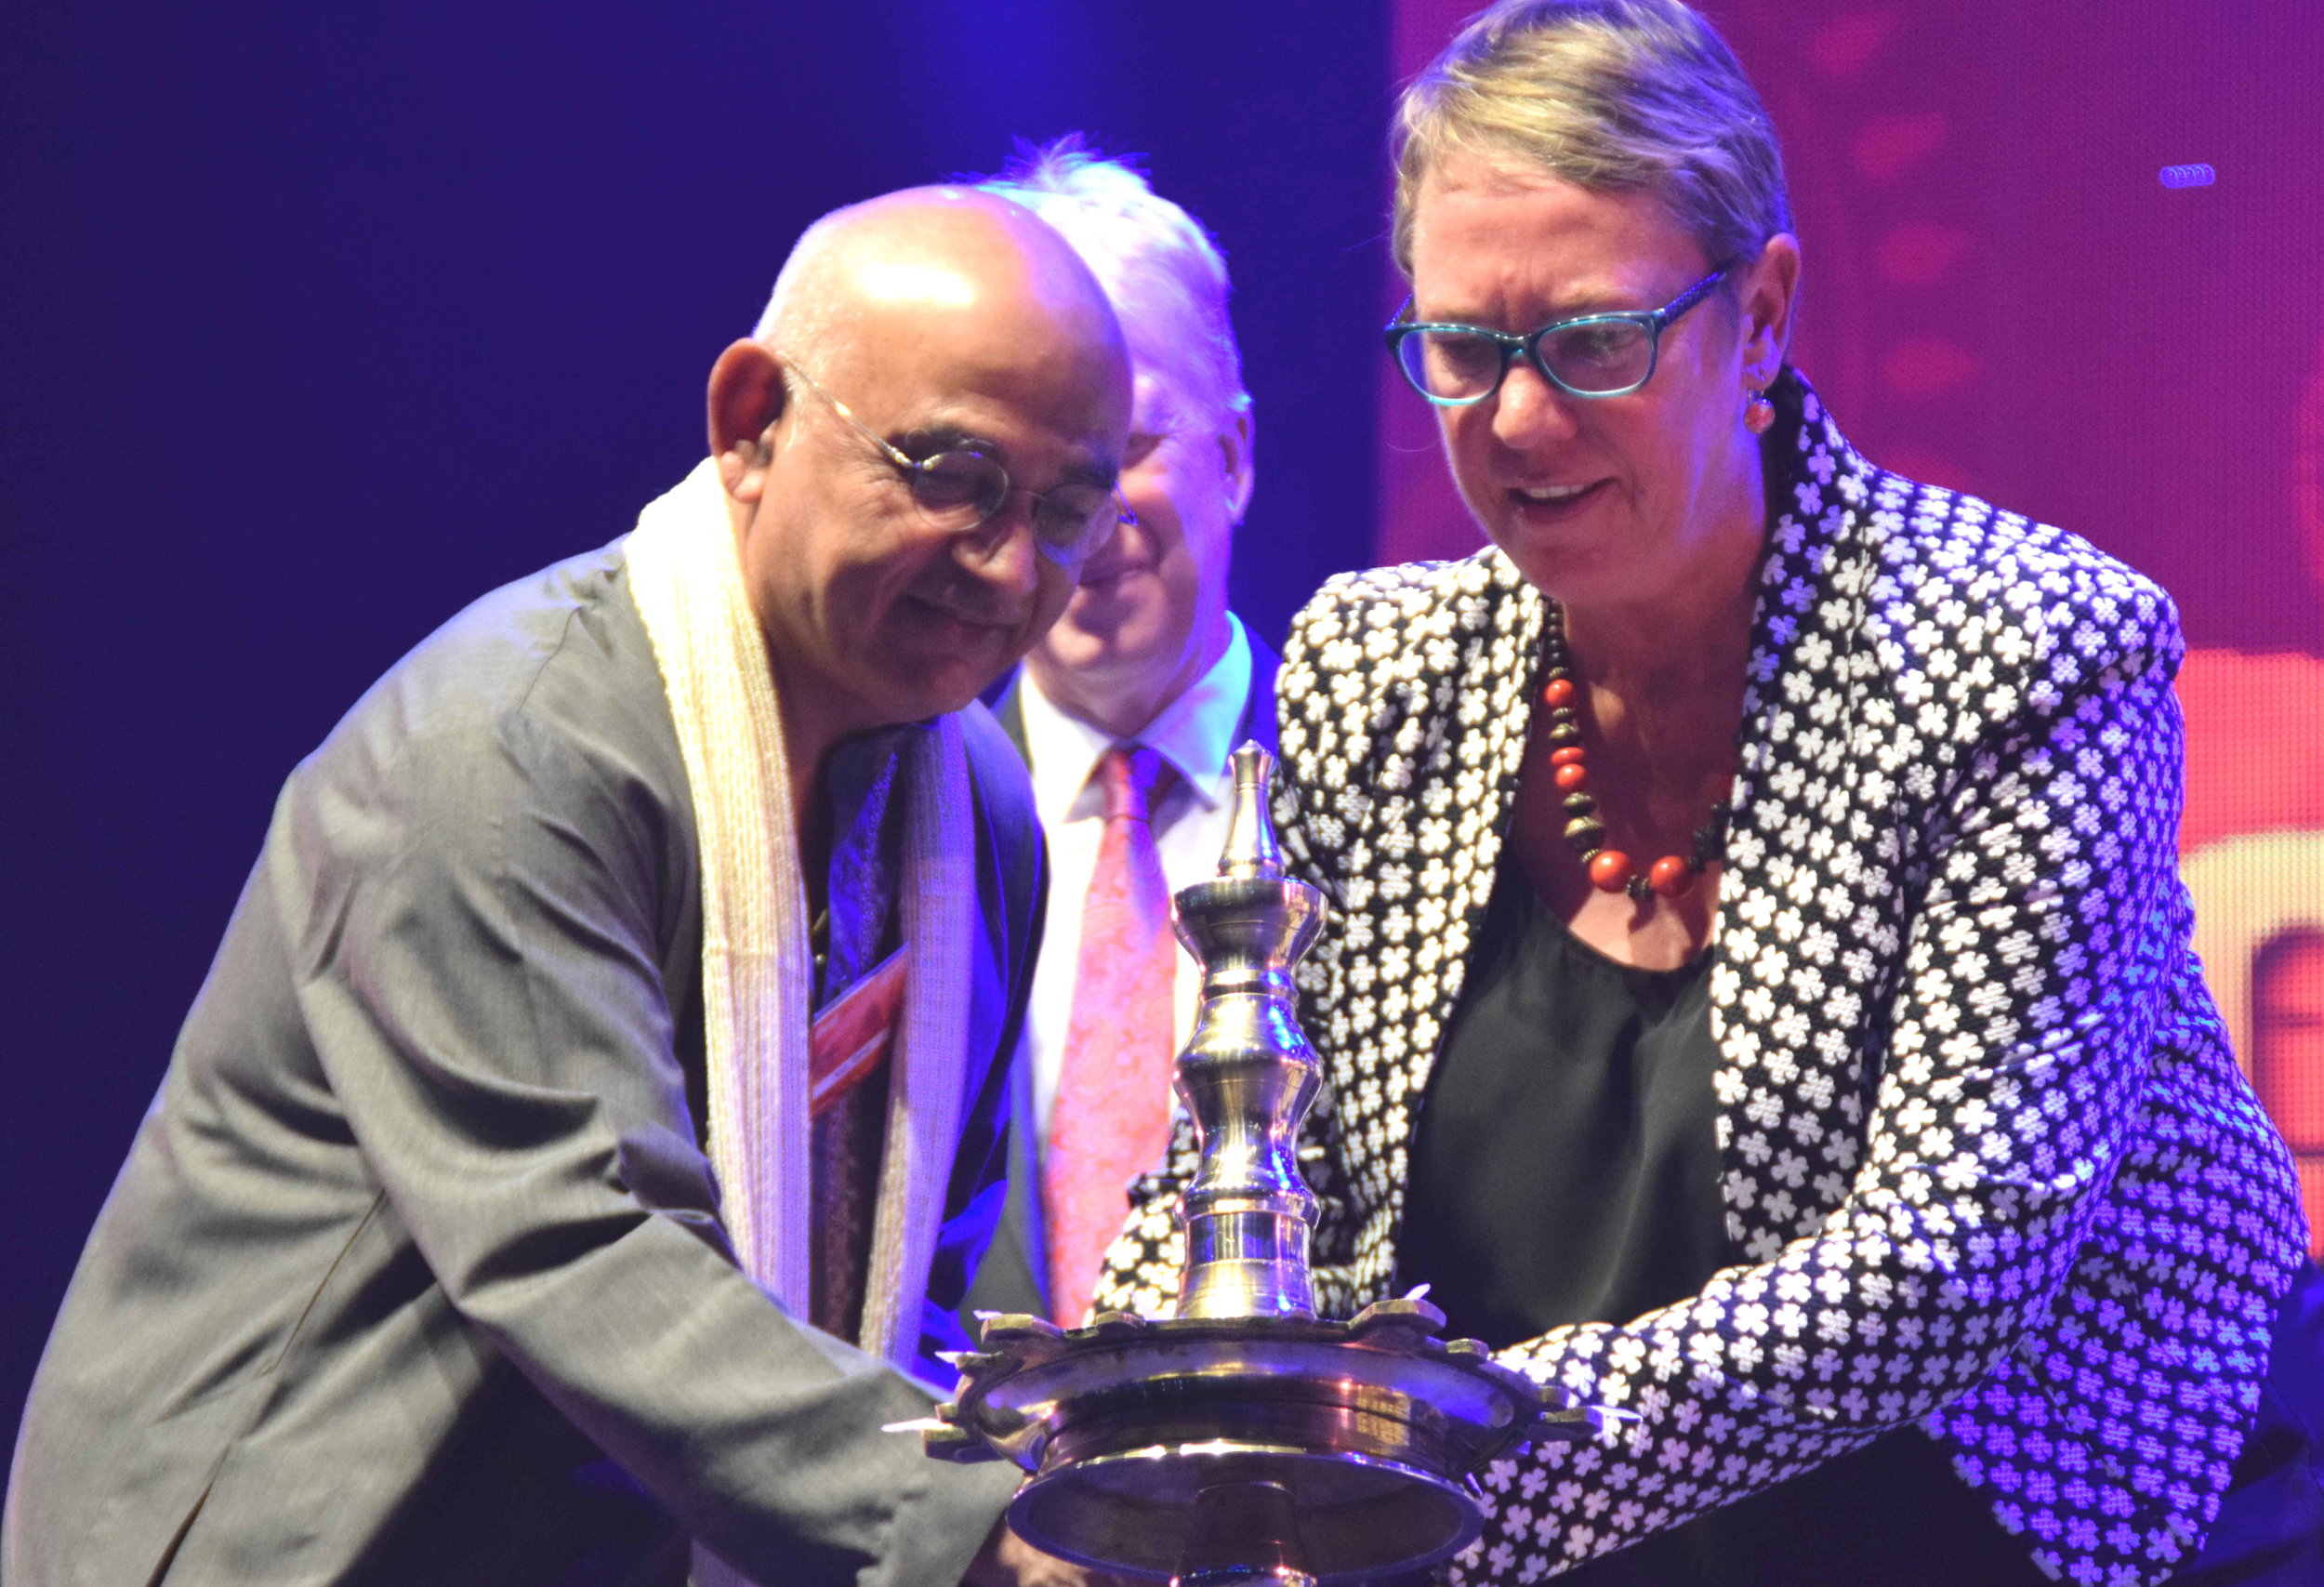  Natu Rama, President of the Indian Social and Cultural Club, with Ruth Dyson, the Labour MP for Port Hills, lighting the lamp to start the event traditionally 